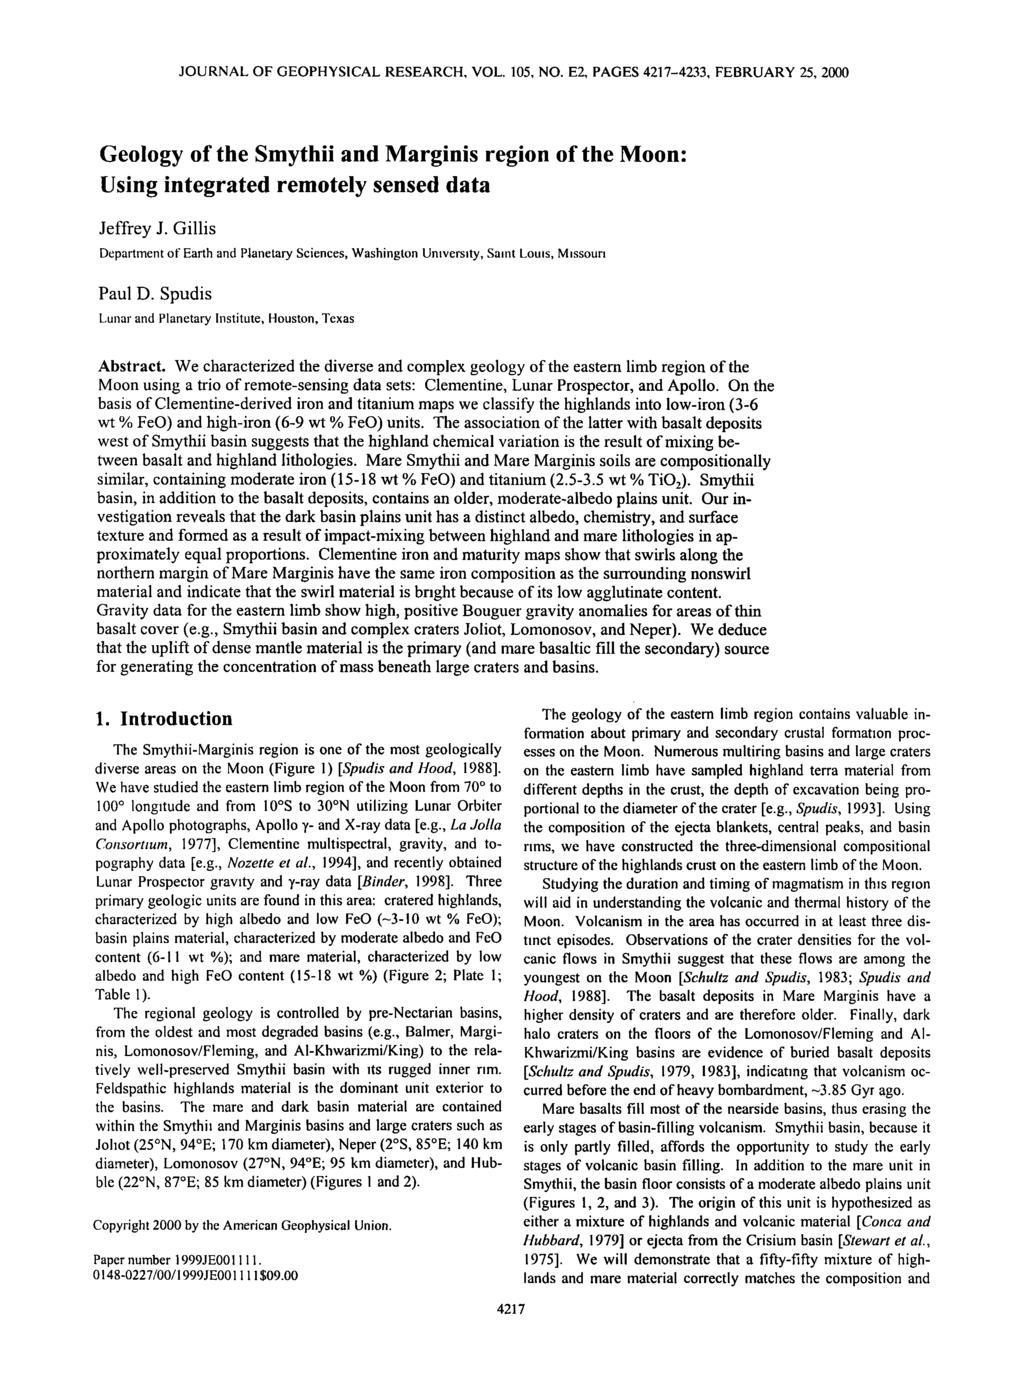 JOURNAL OF GEOPHYSICAL RESEARCH, VOL. 105, NO. E2, PAGES 4217-4233, FEBRUARY 25, 2000 Geology of the Smythii and Marginis region of the Moon' Using integrated remotely sensed data Jeffrey J.